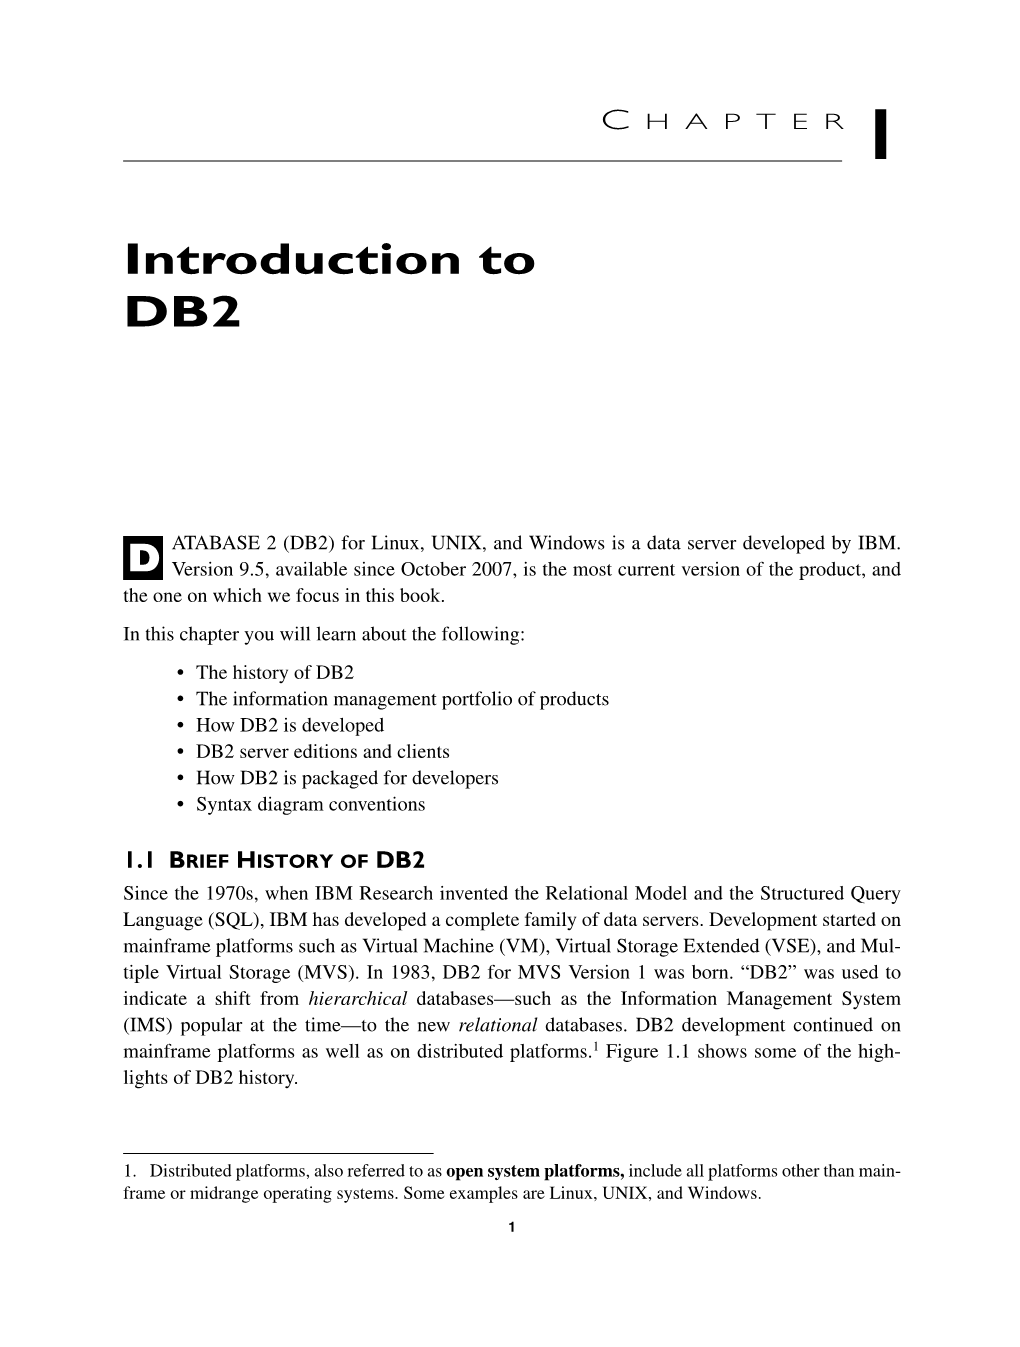 Introduction to DB2